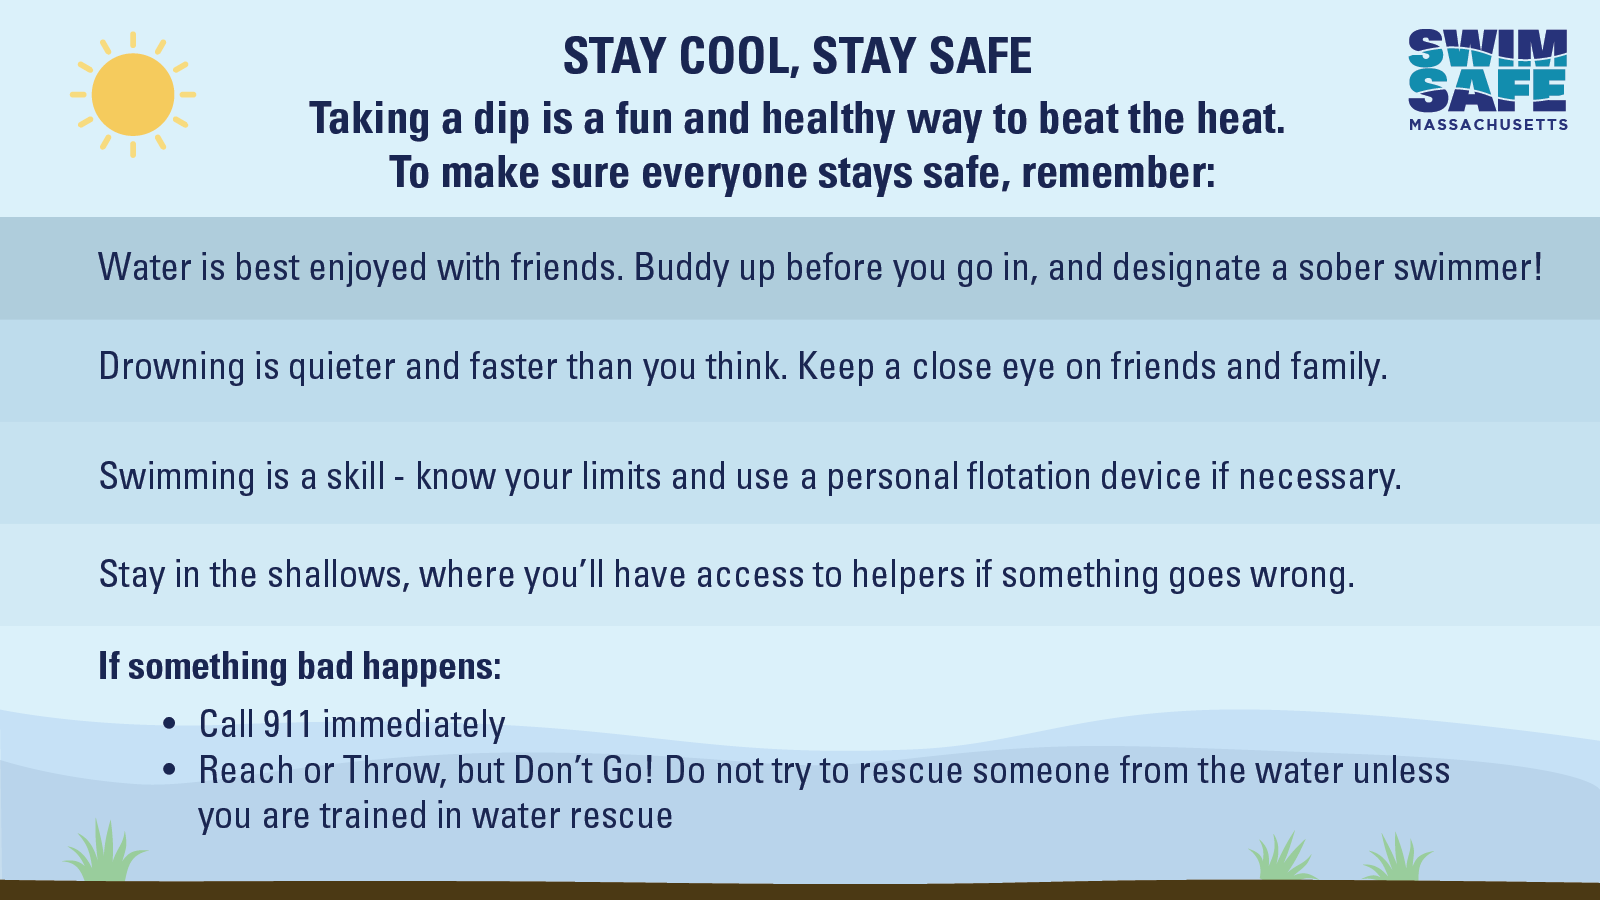 Stay Cool, Stay Safe. Taking a dip is a fun and healthy way to beat the heat. To make sure everyone stays safe, remember:  Water is best enjoyed with friends. Buddy up before you go in, and designate a sober swimmer!  Drowning is quieter and faster than you think. Keep a close eye on friends and family.  Swimming is a skill - know your limits and use a personal flotation device if necessary. Stay in the shallows, where you’ll have access to helpers if something goes wrong. If something bad happens: Call 911